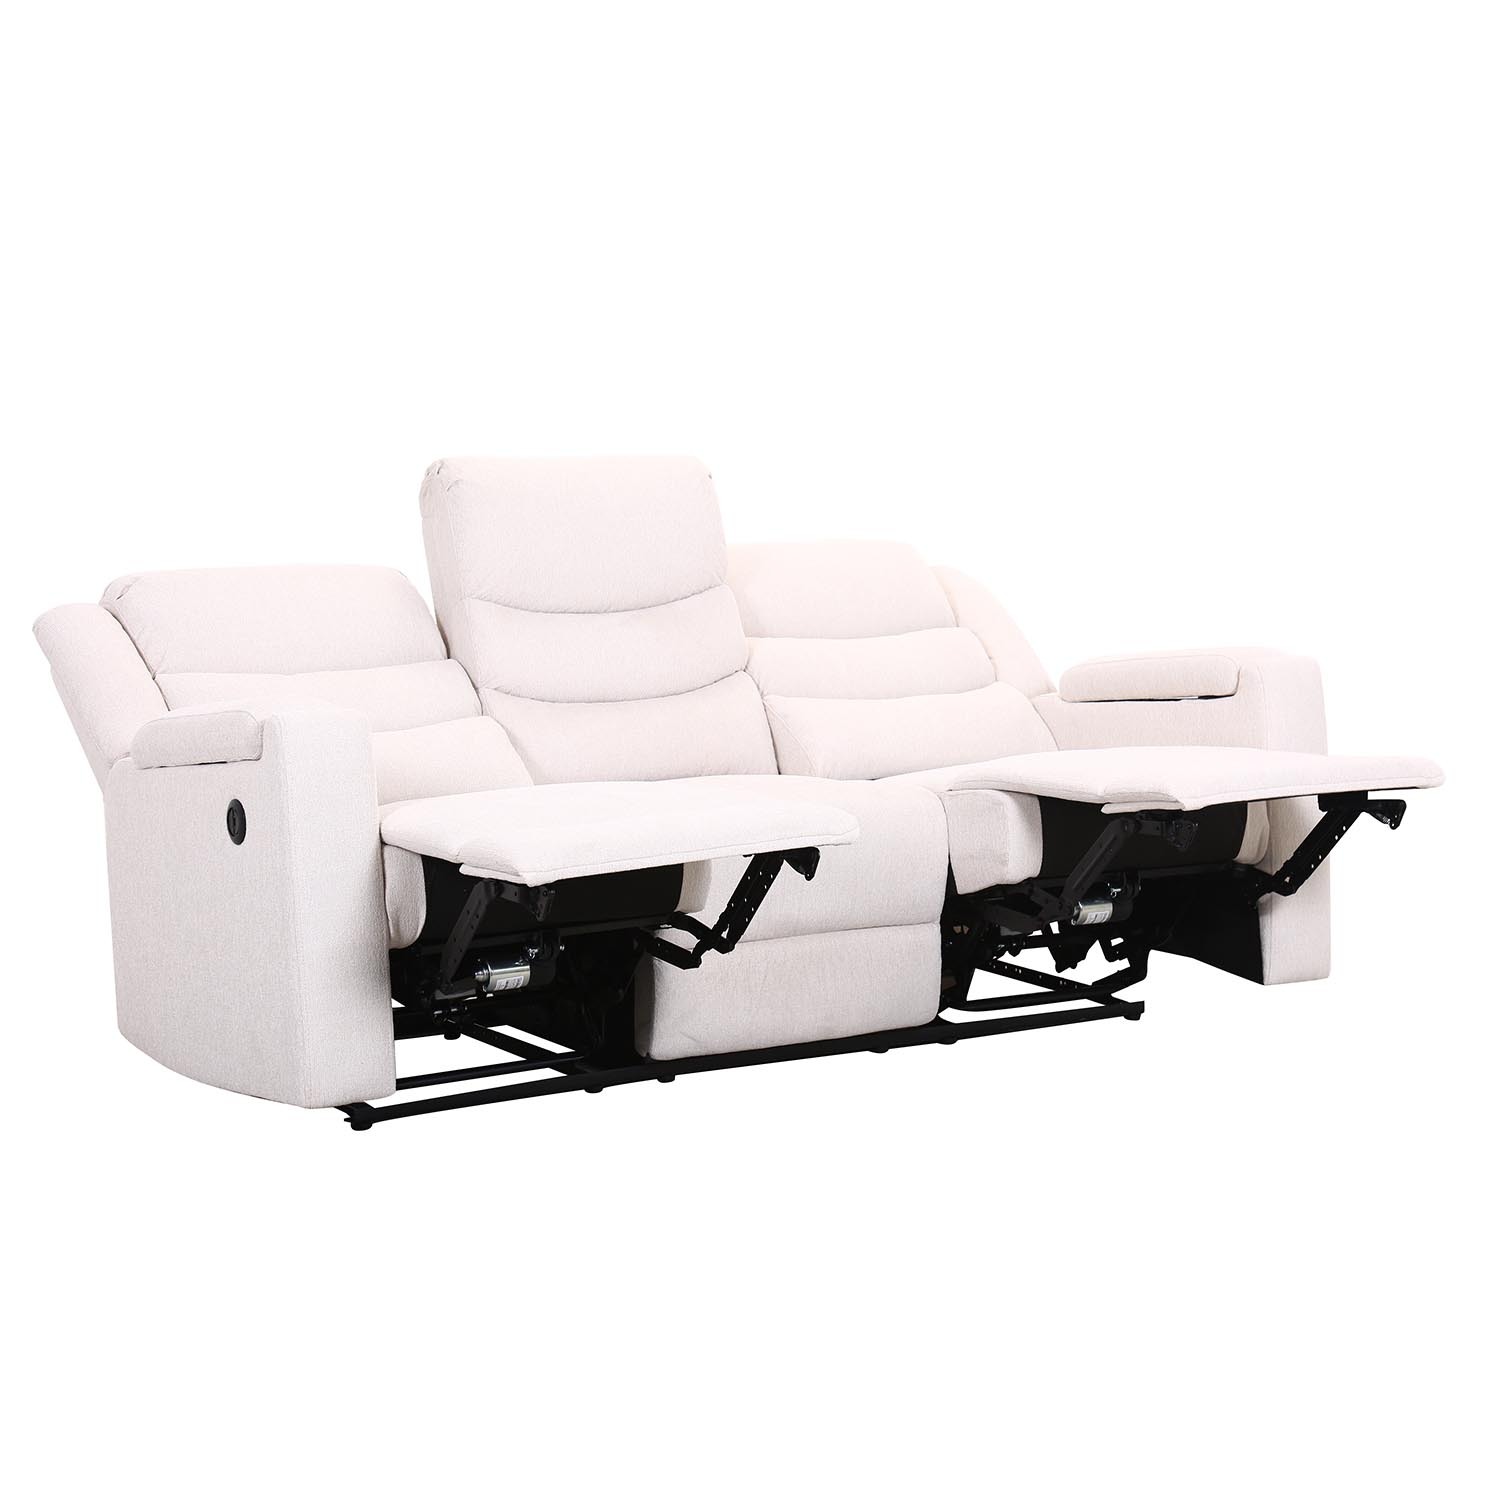 Heritage 3 Seater Ivory Recliner Sofa Image 5